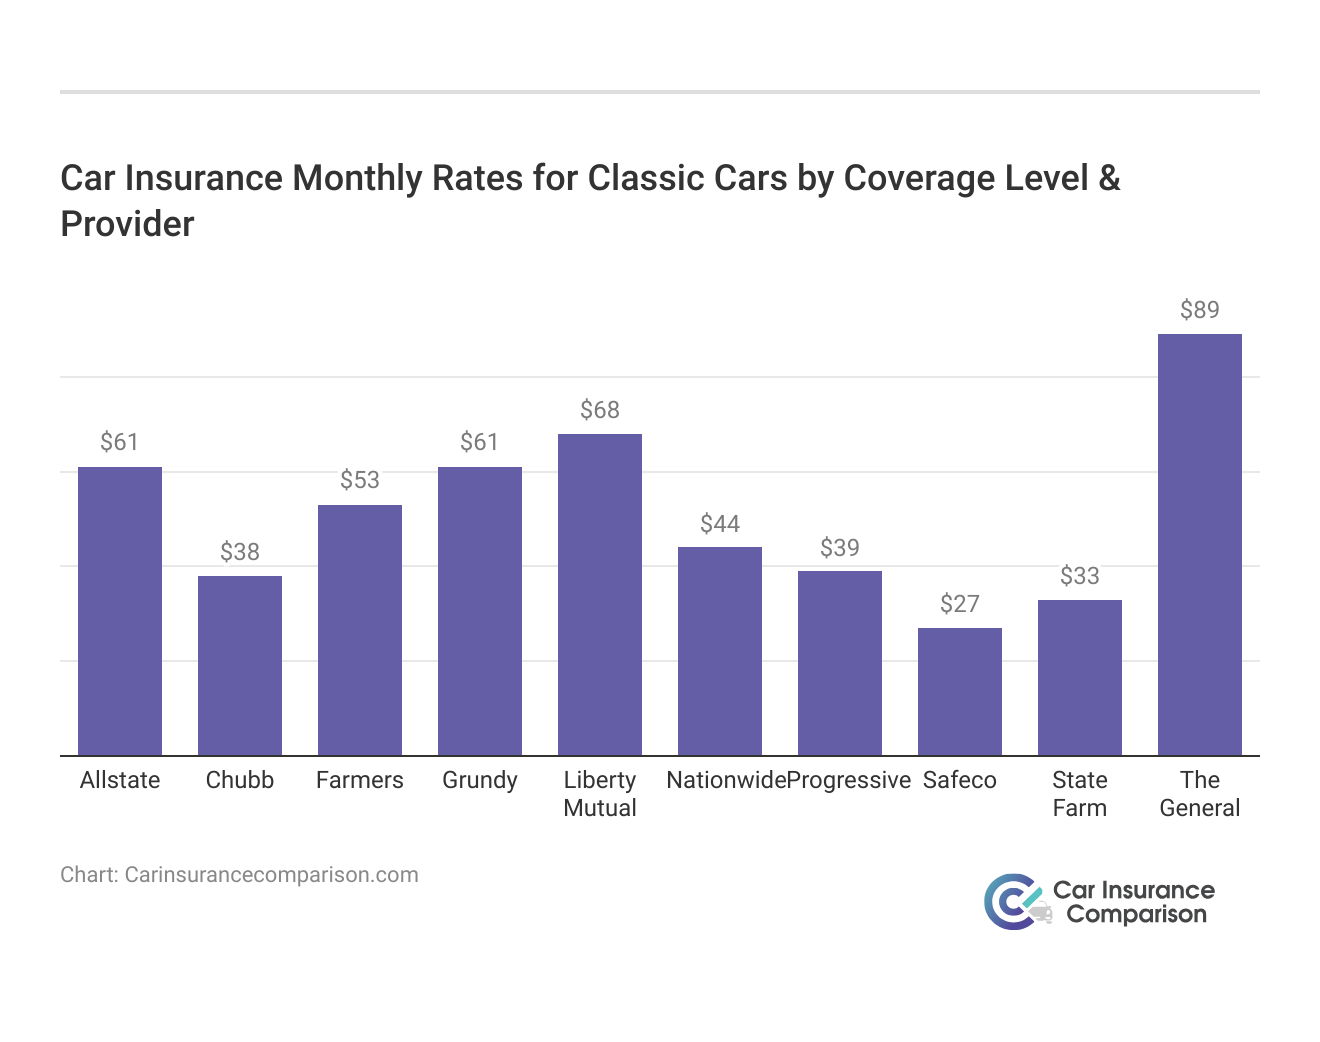 <h3>Car Insurance Monthly Rates for Classic Cars by Coverage Level & Provider</h3>